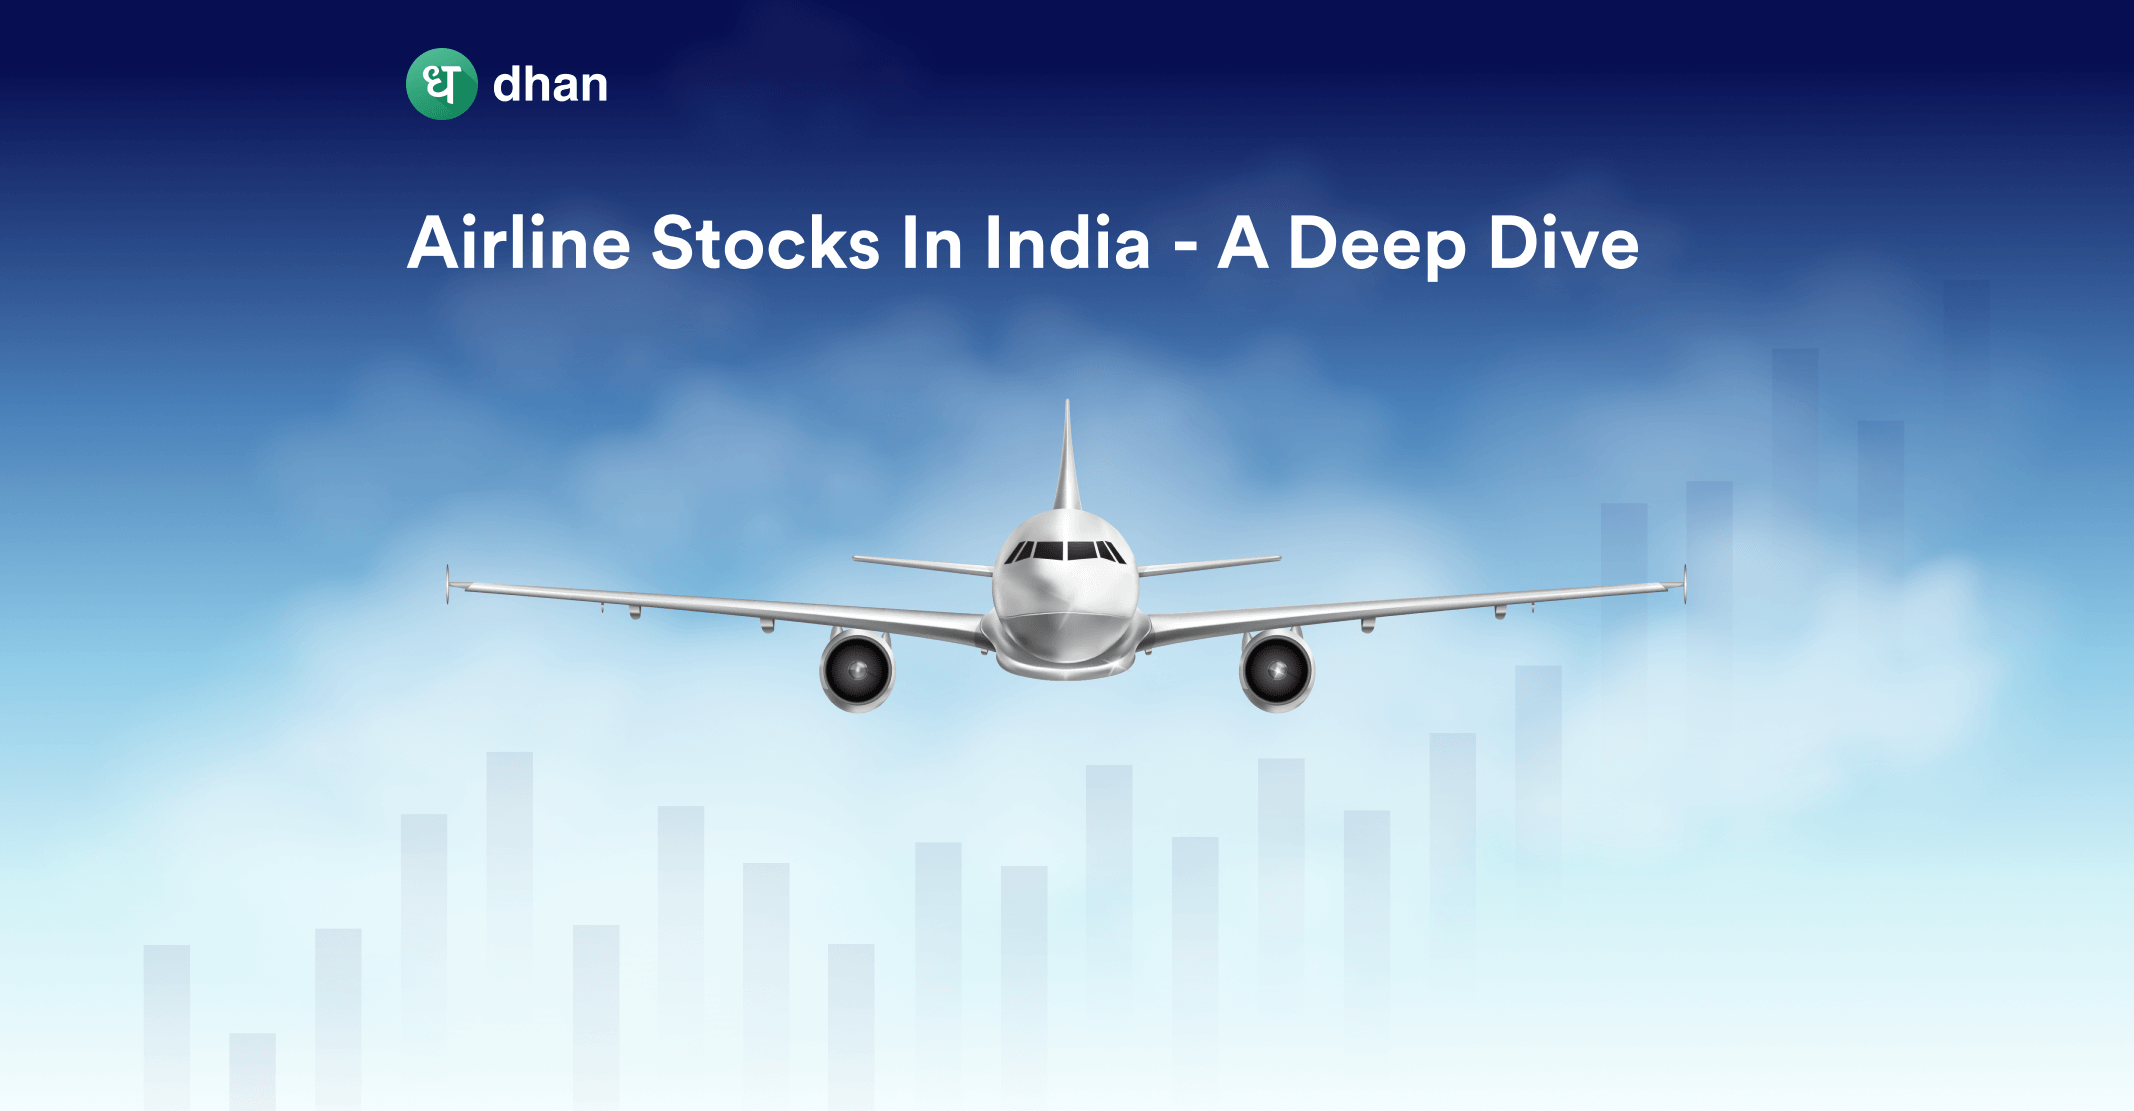 Airline Stocks in India - A Deep Dive